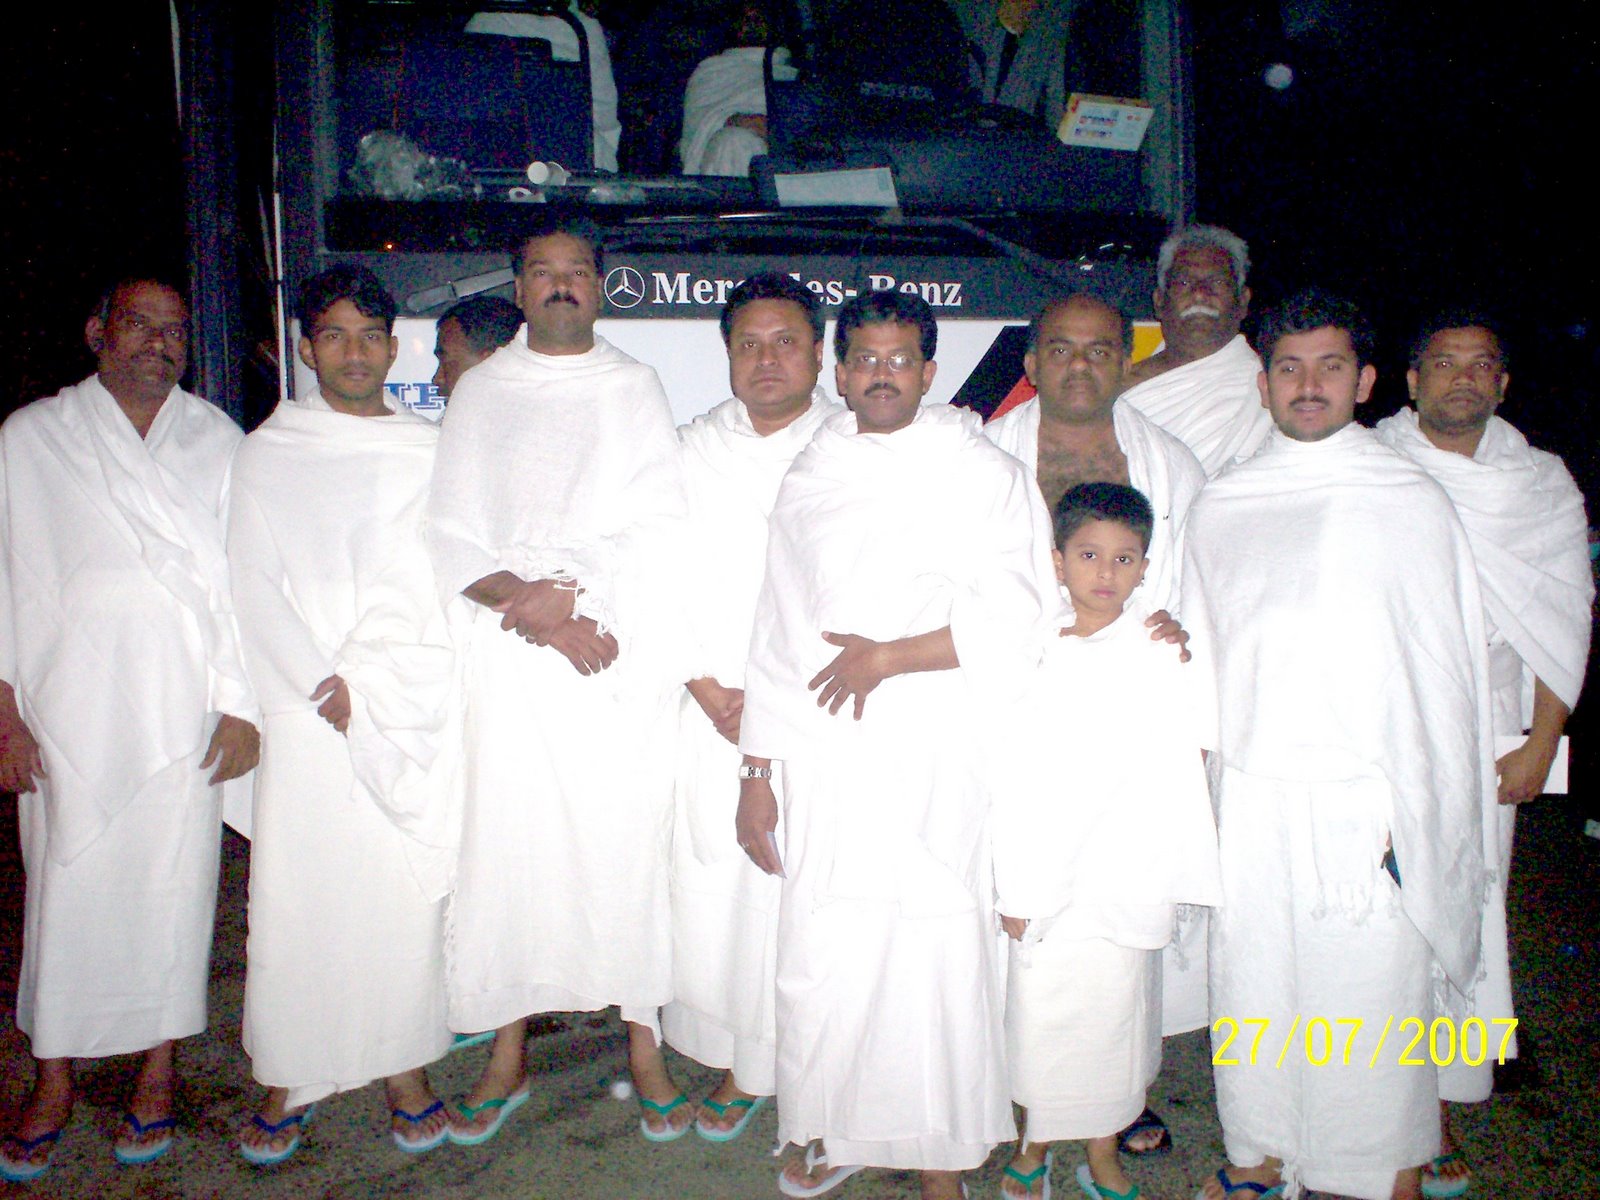 . Jahir Hussain Performed Umra on 27th July 2007 with TMCA Special Umra Team.